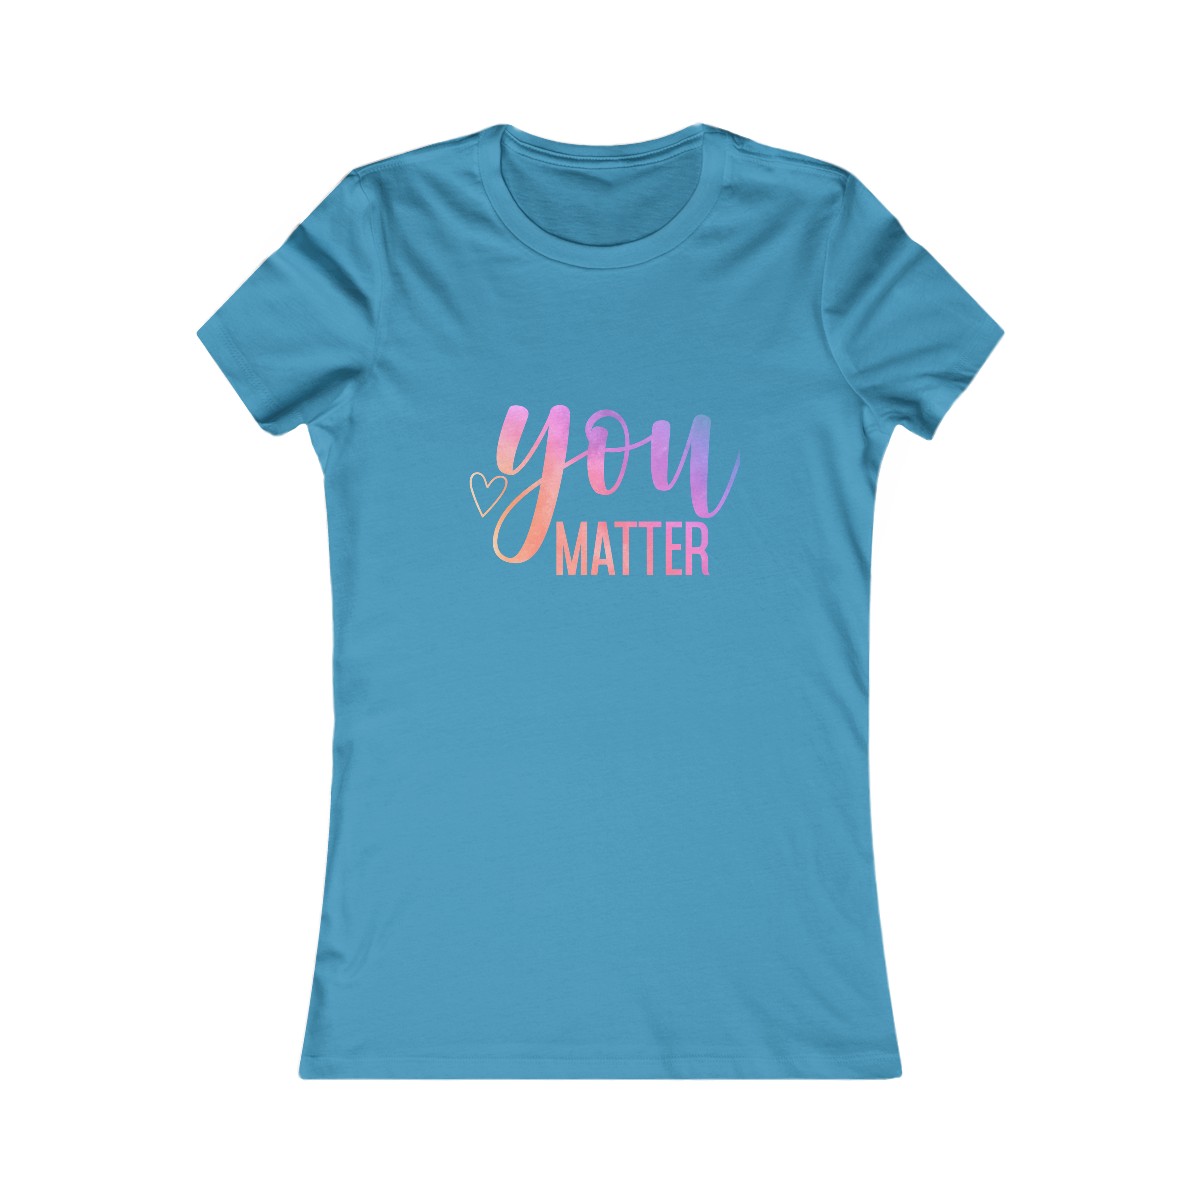 Always remember "You Matter!" This fitted shirt's motto is the perfect reminder, just in time for the #holidays! product thumbnail image